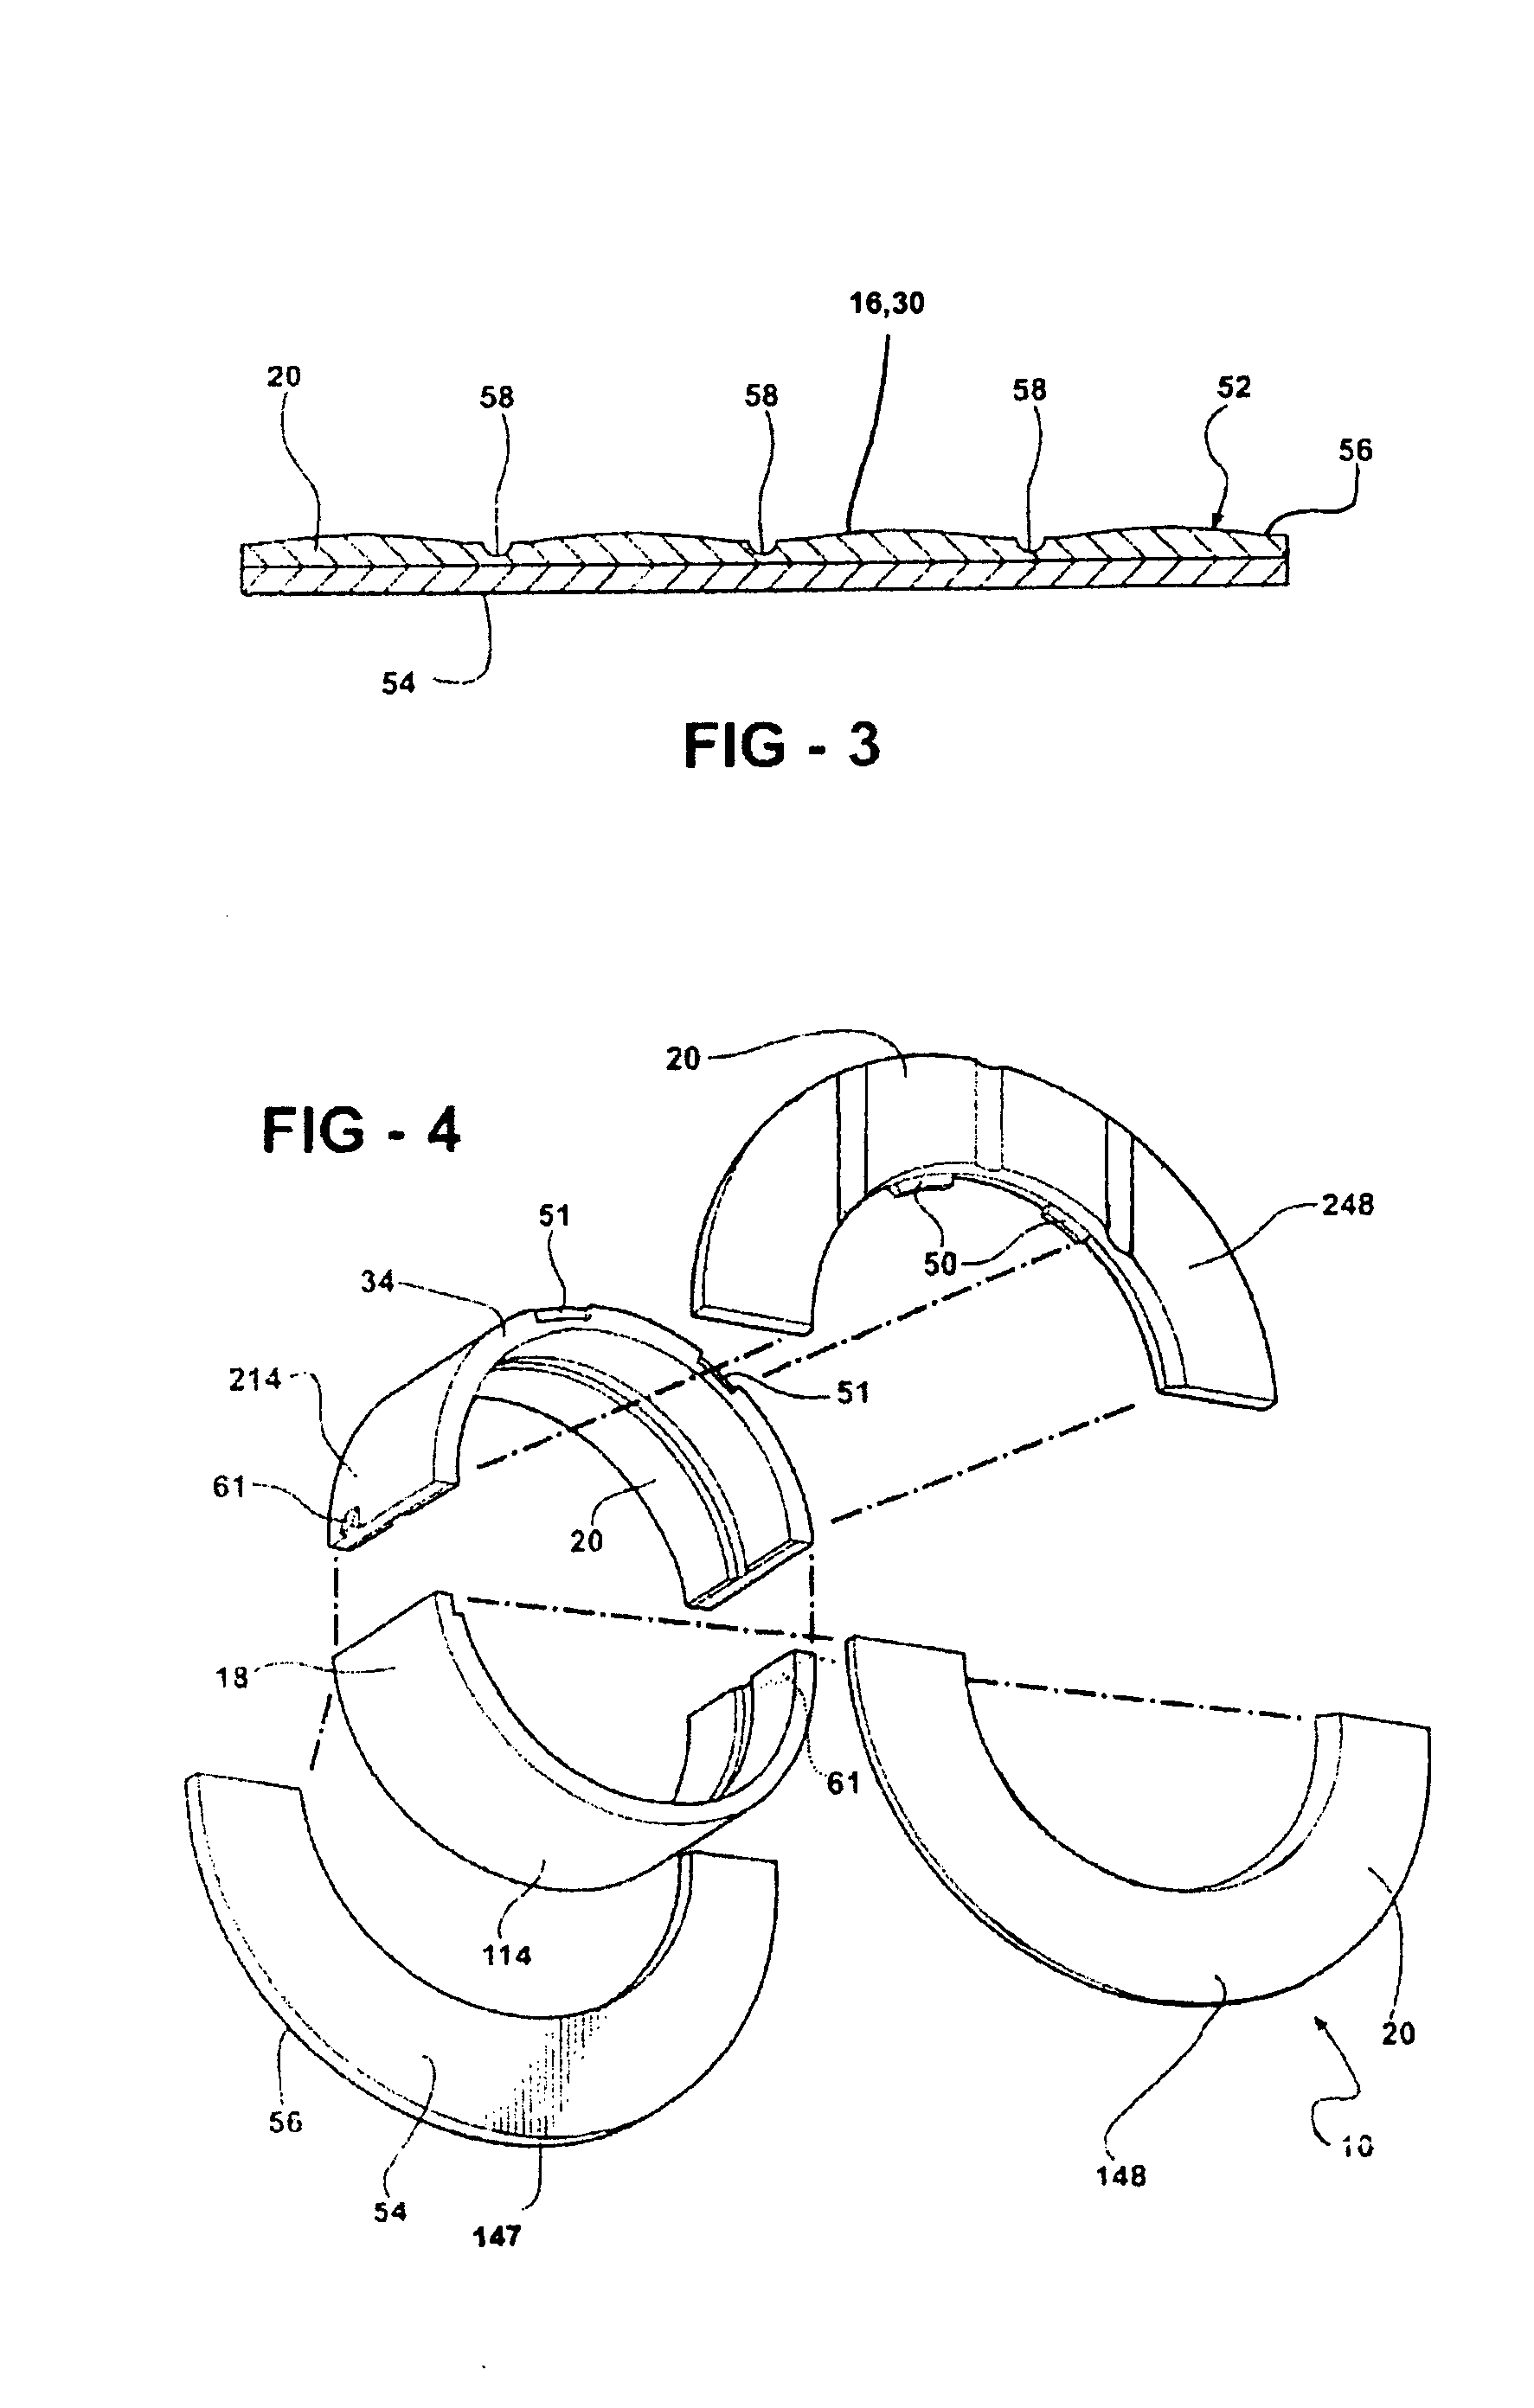 Thrust bearing assembly